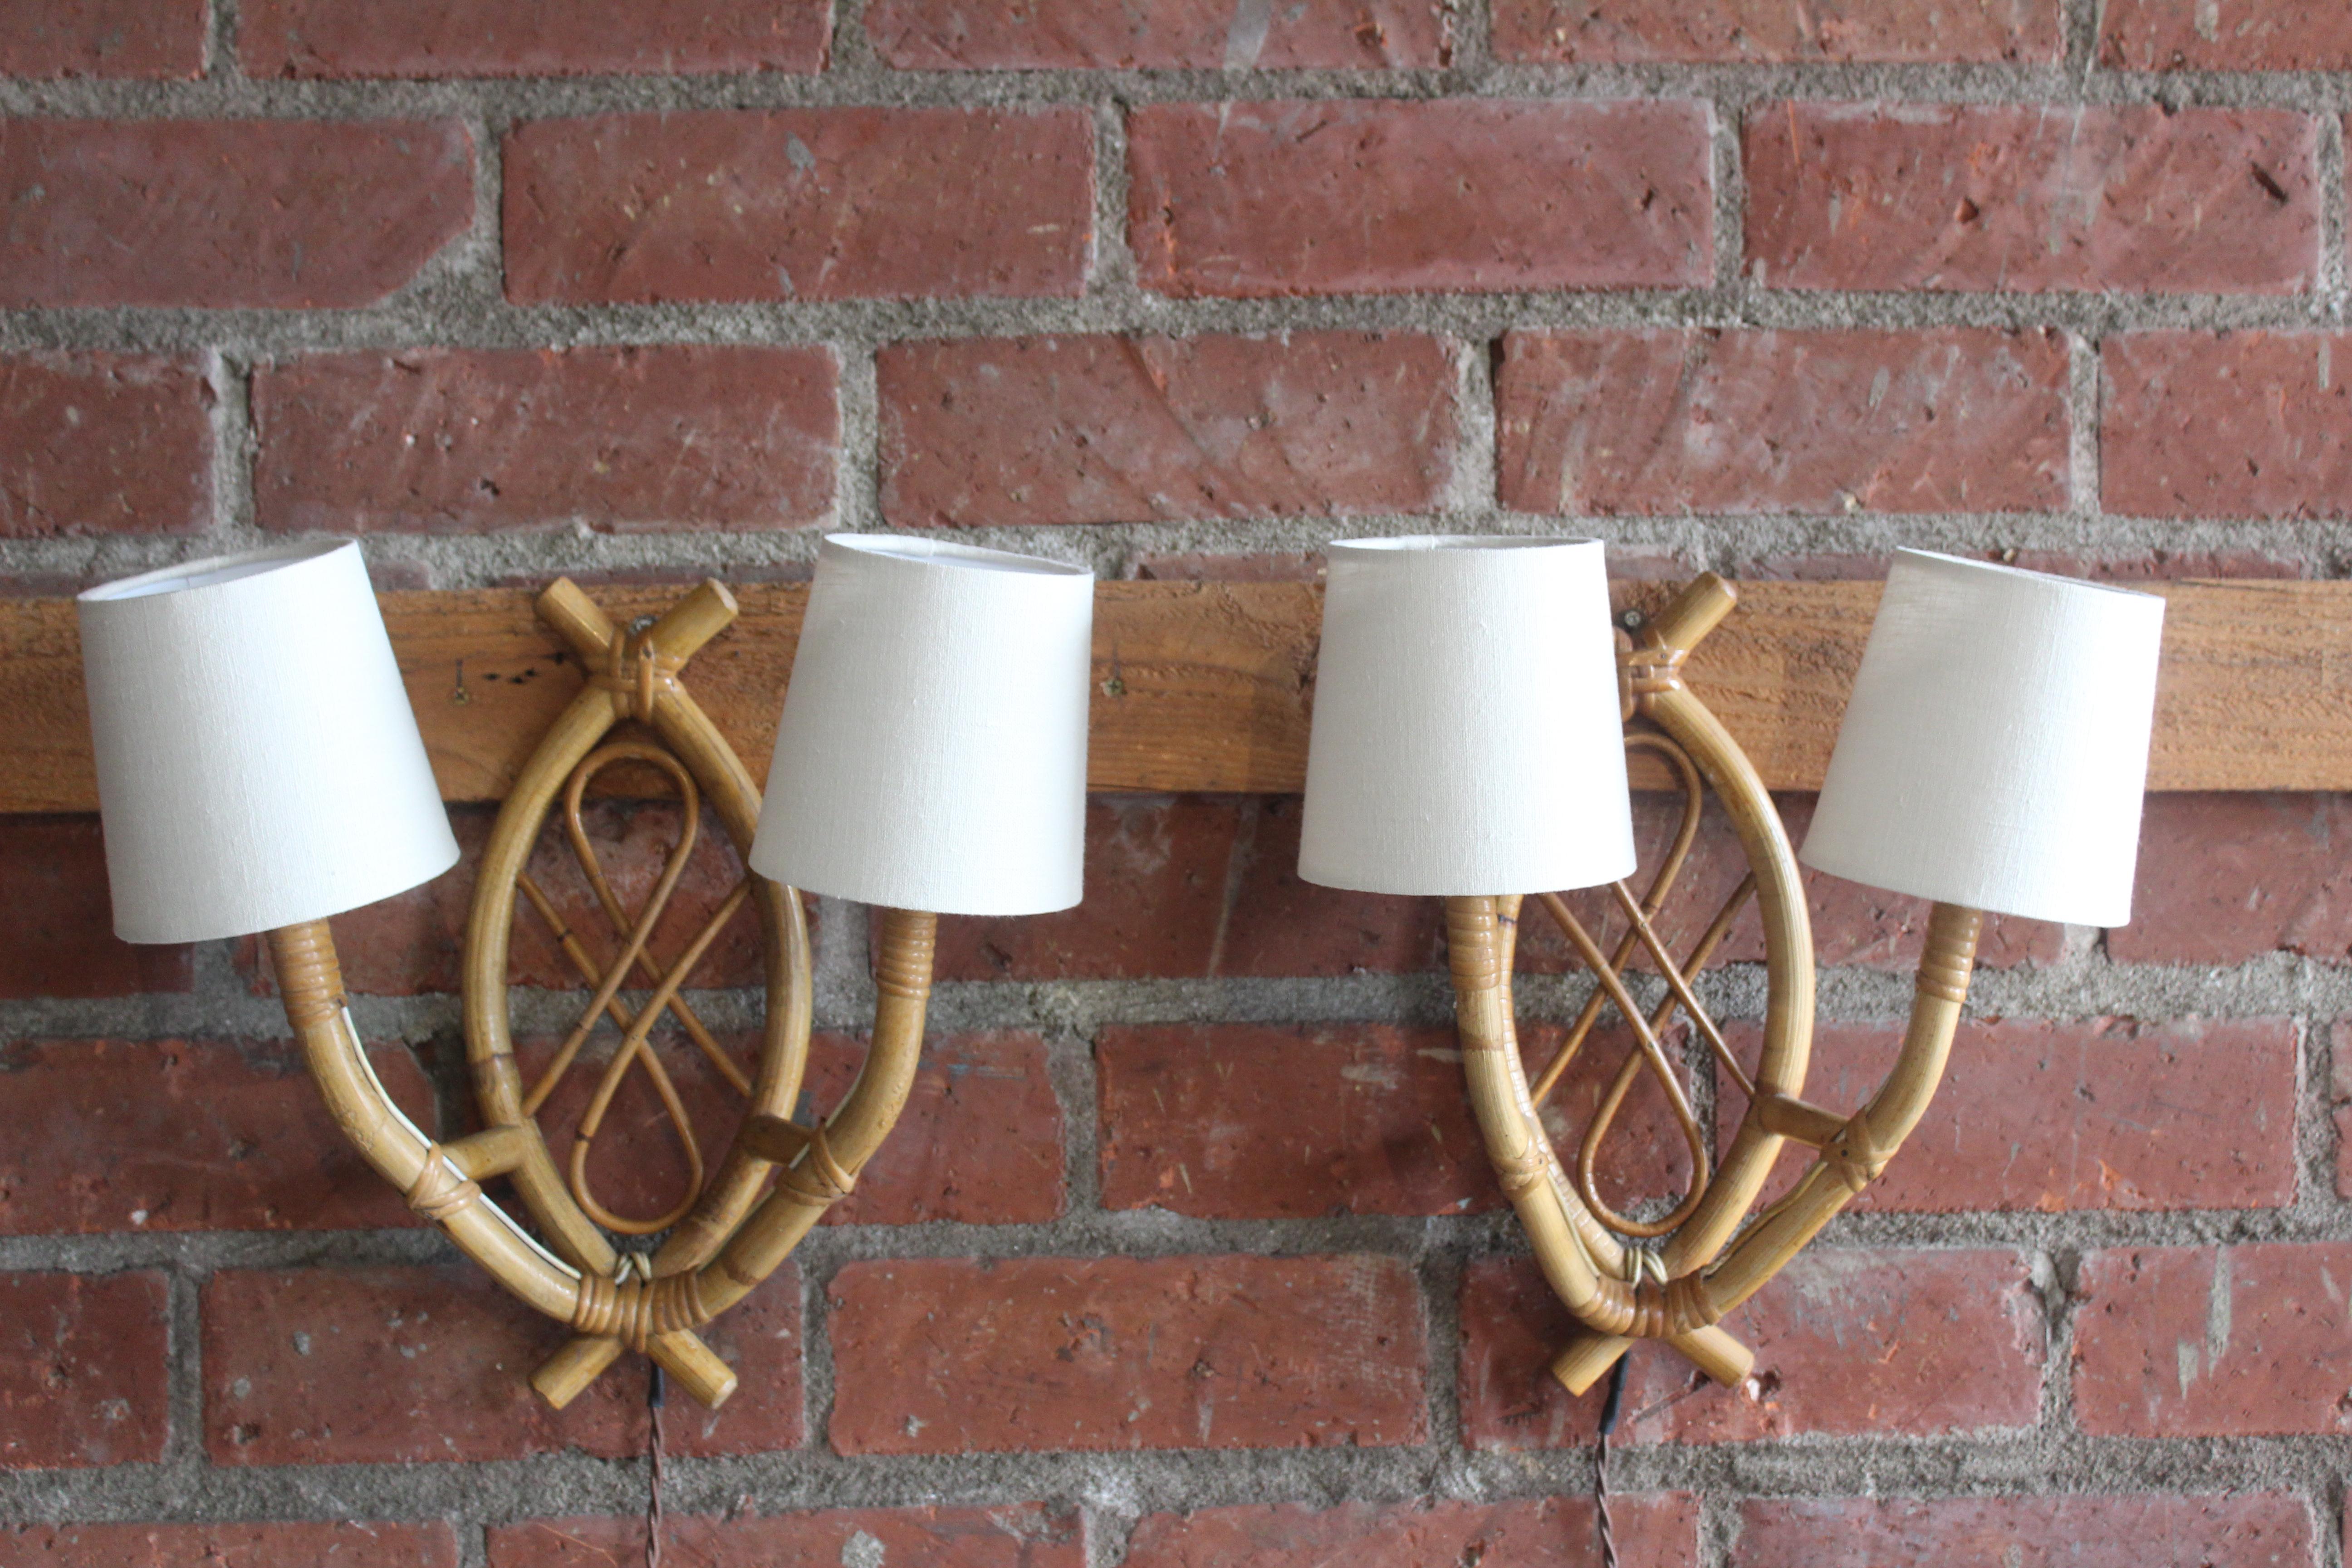 Pair of vintage 1960s French bamboo sconces attributed to Louis Sognot. The pair are in wonderful condition and have been rewired for U.S standards. They include custom made shades in Belgian linen. Price is for the pair.